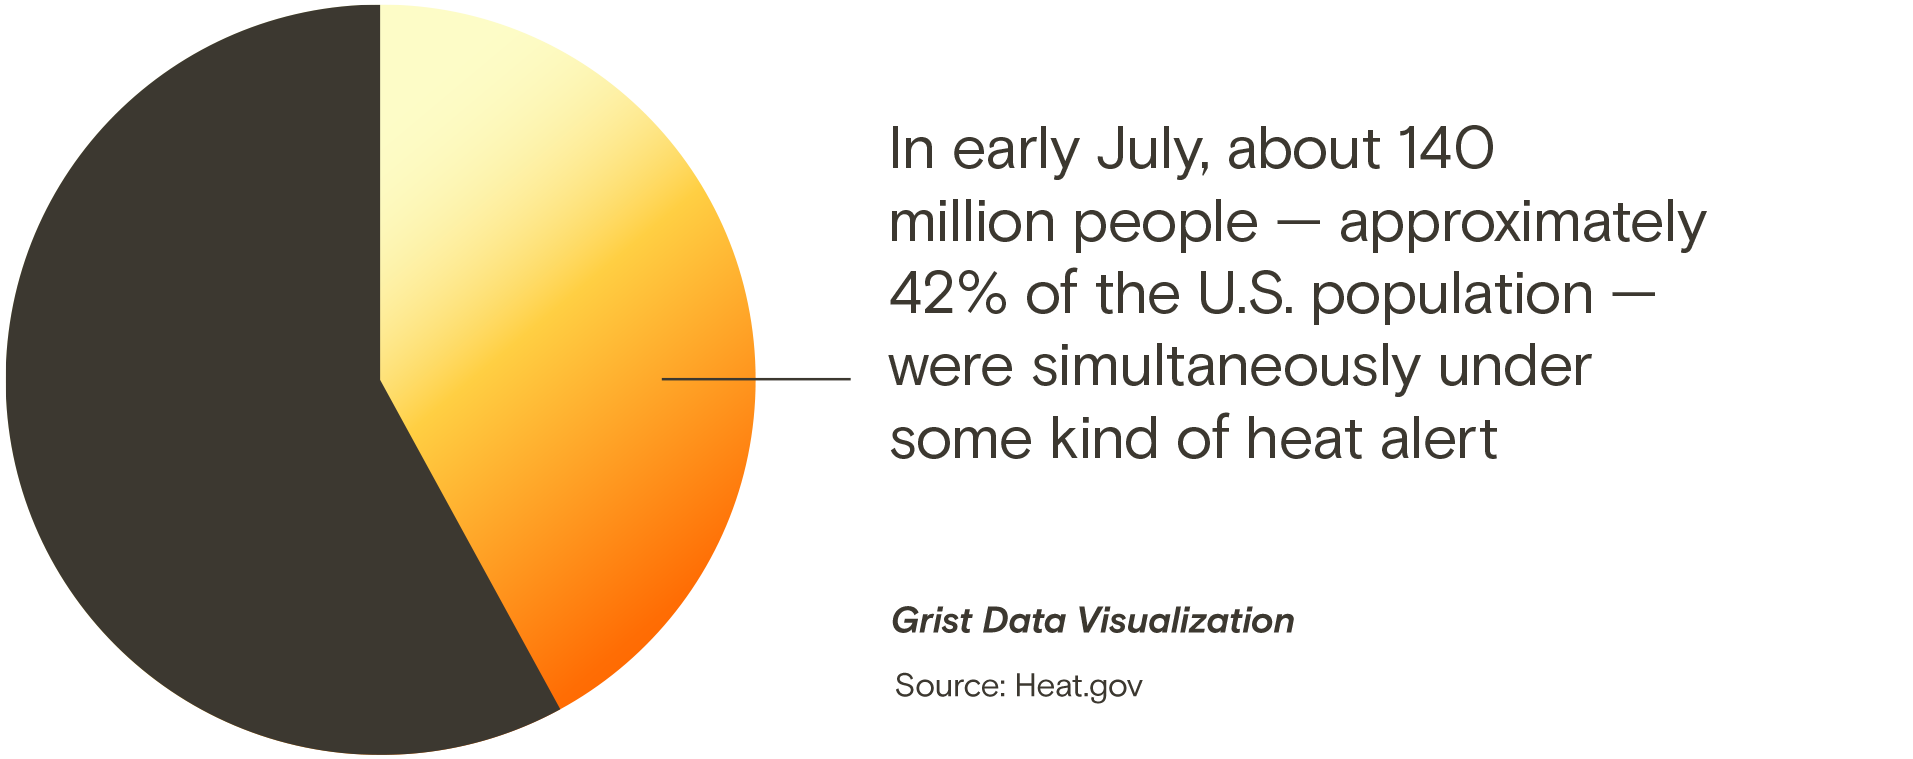 In early July, about 140 million people — approximately 42% of the American population — were simultaneously under some kind of heat alert